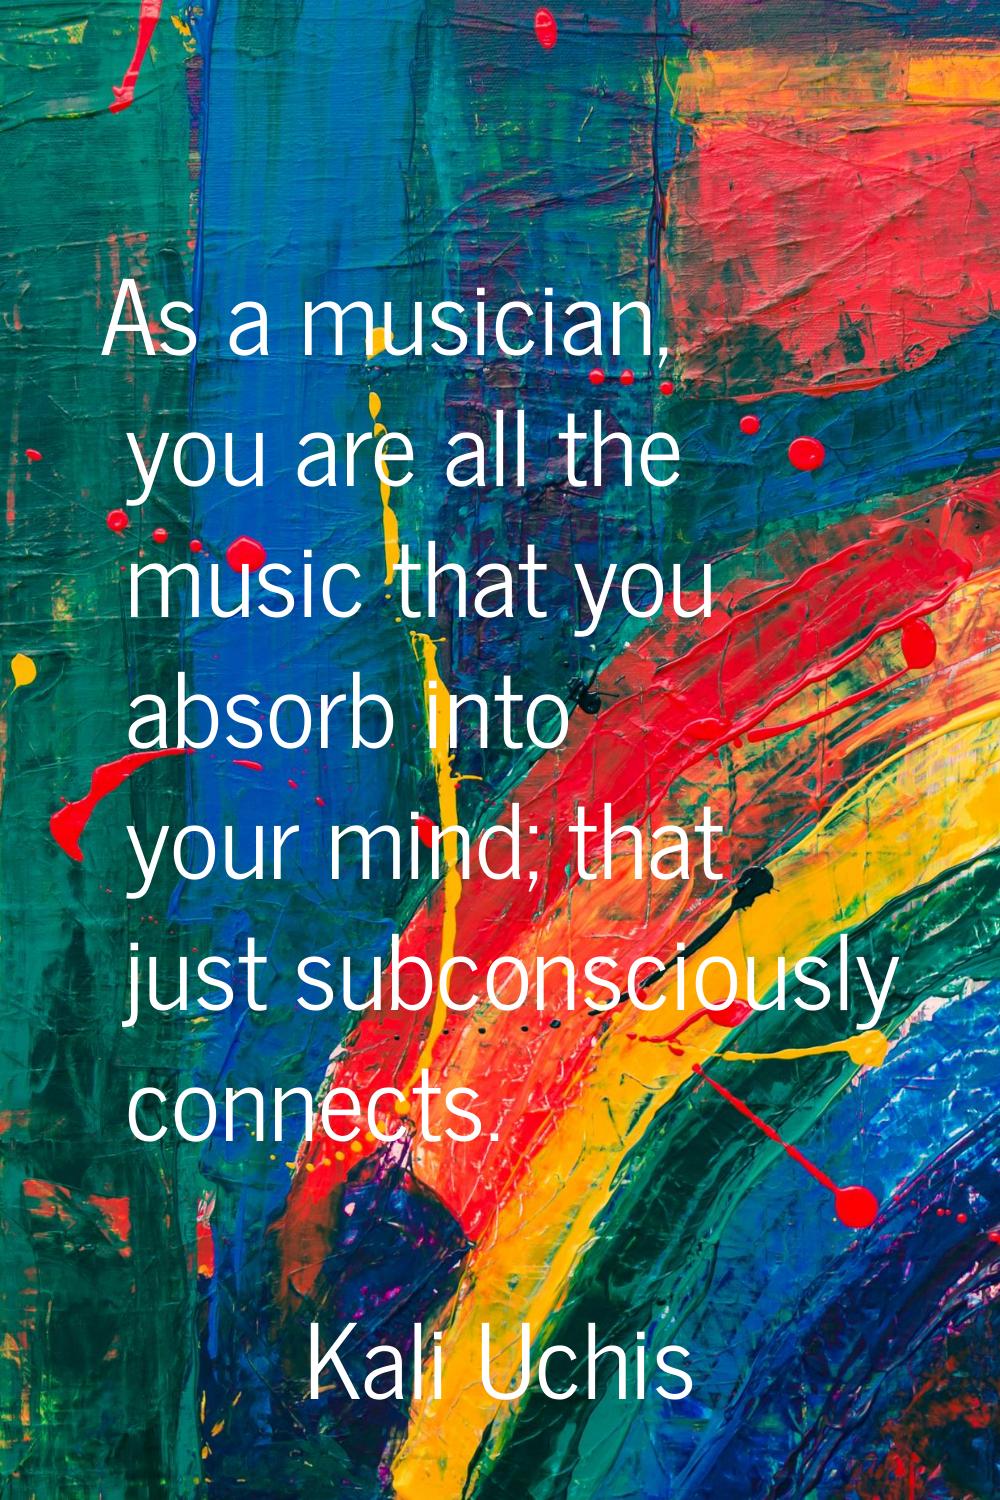 As a musician, you are all the music that you absorb into your mind; that just subconsciously conne